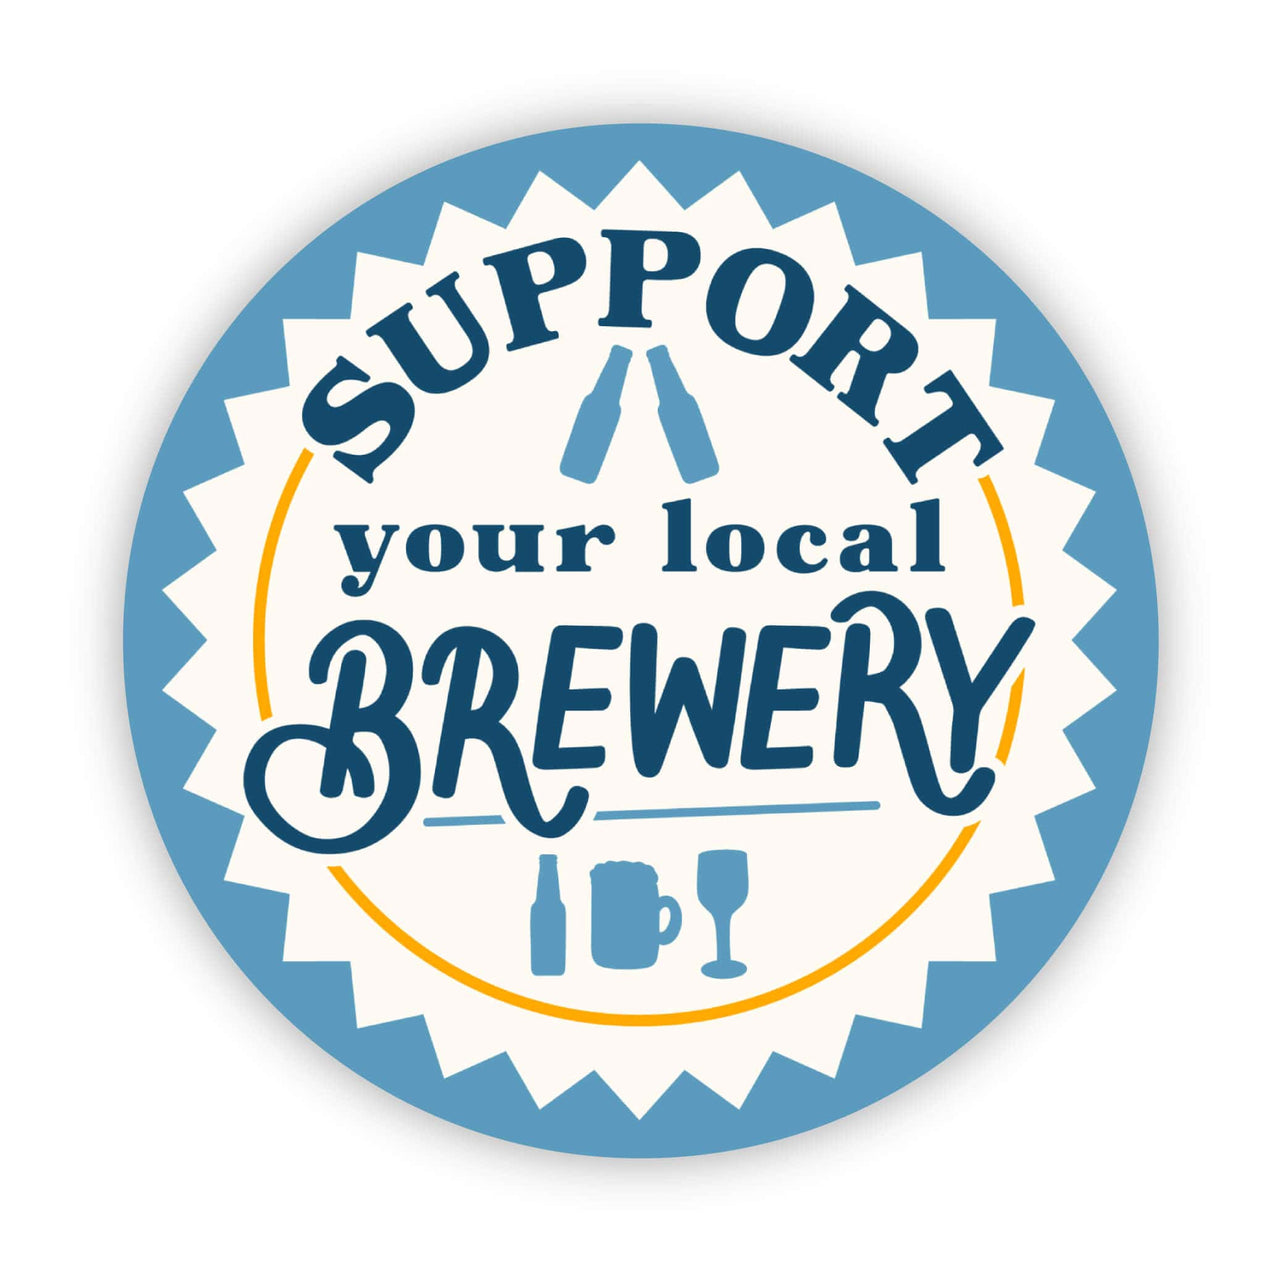 "Support your local brewery" sticker